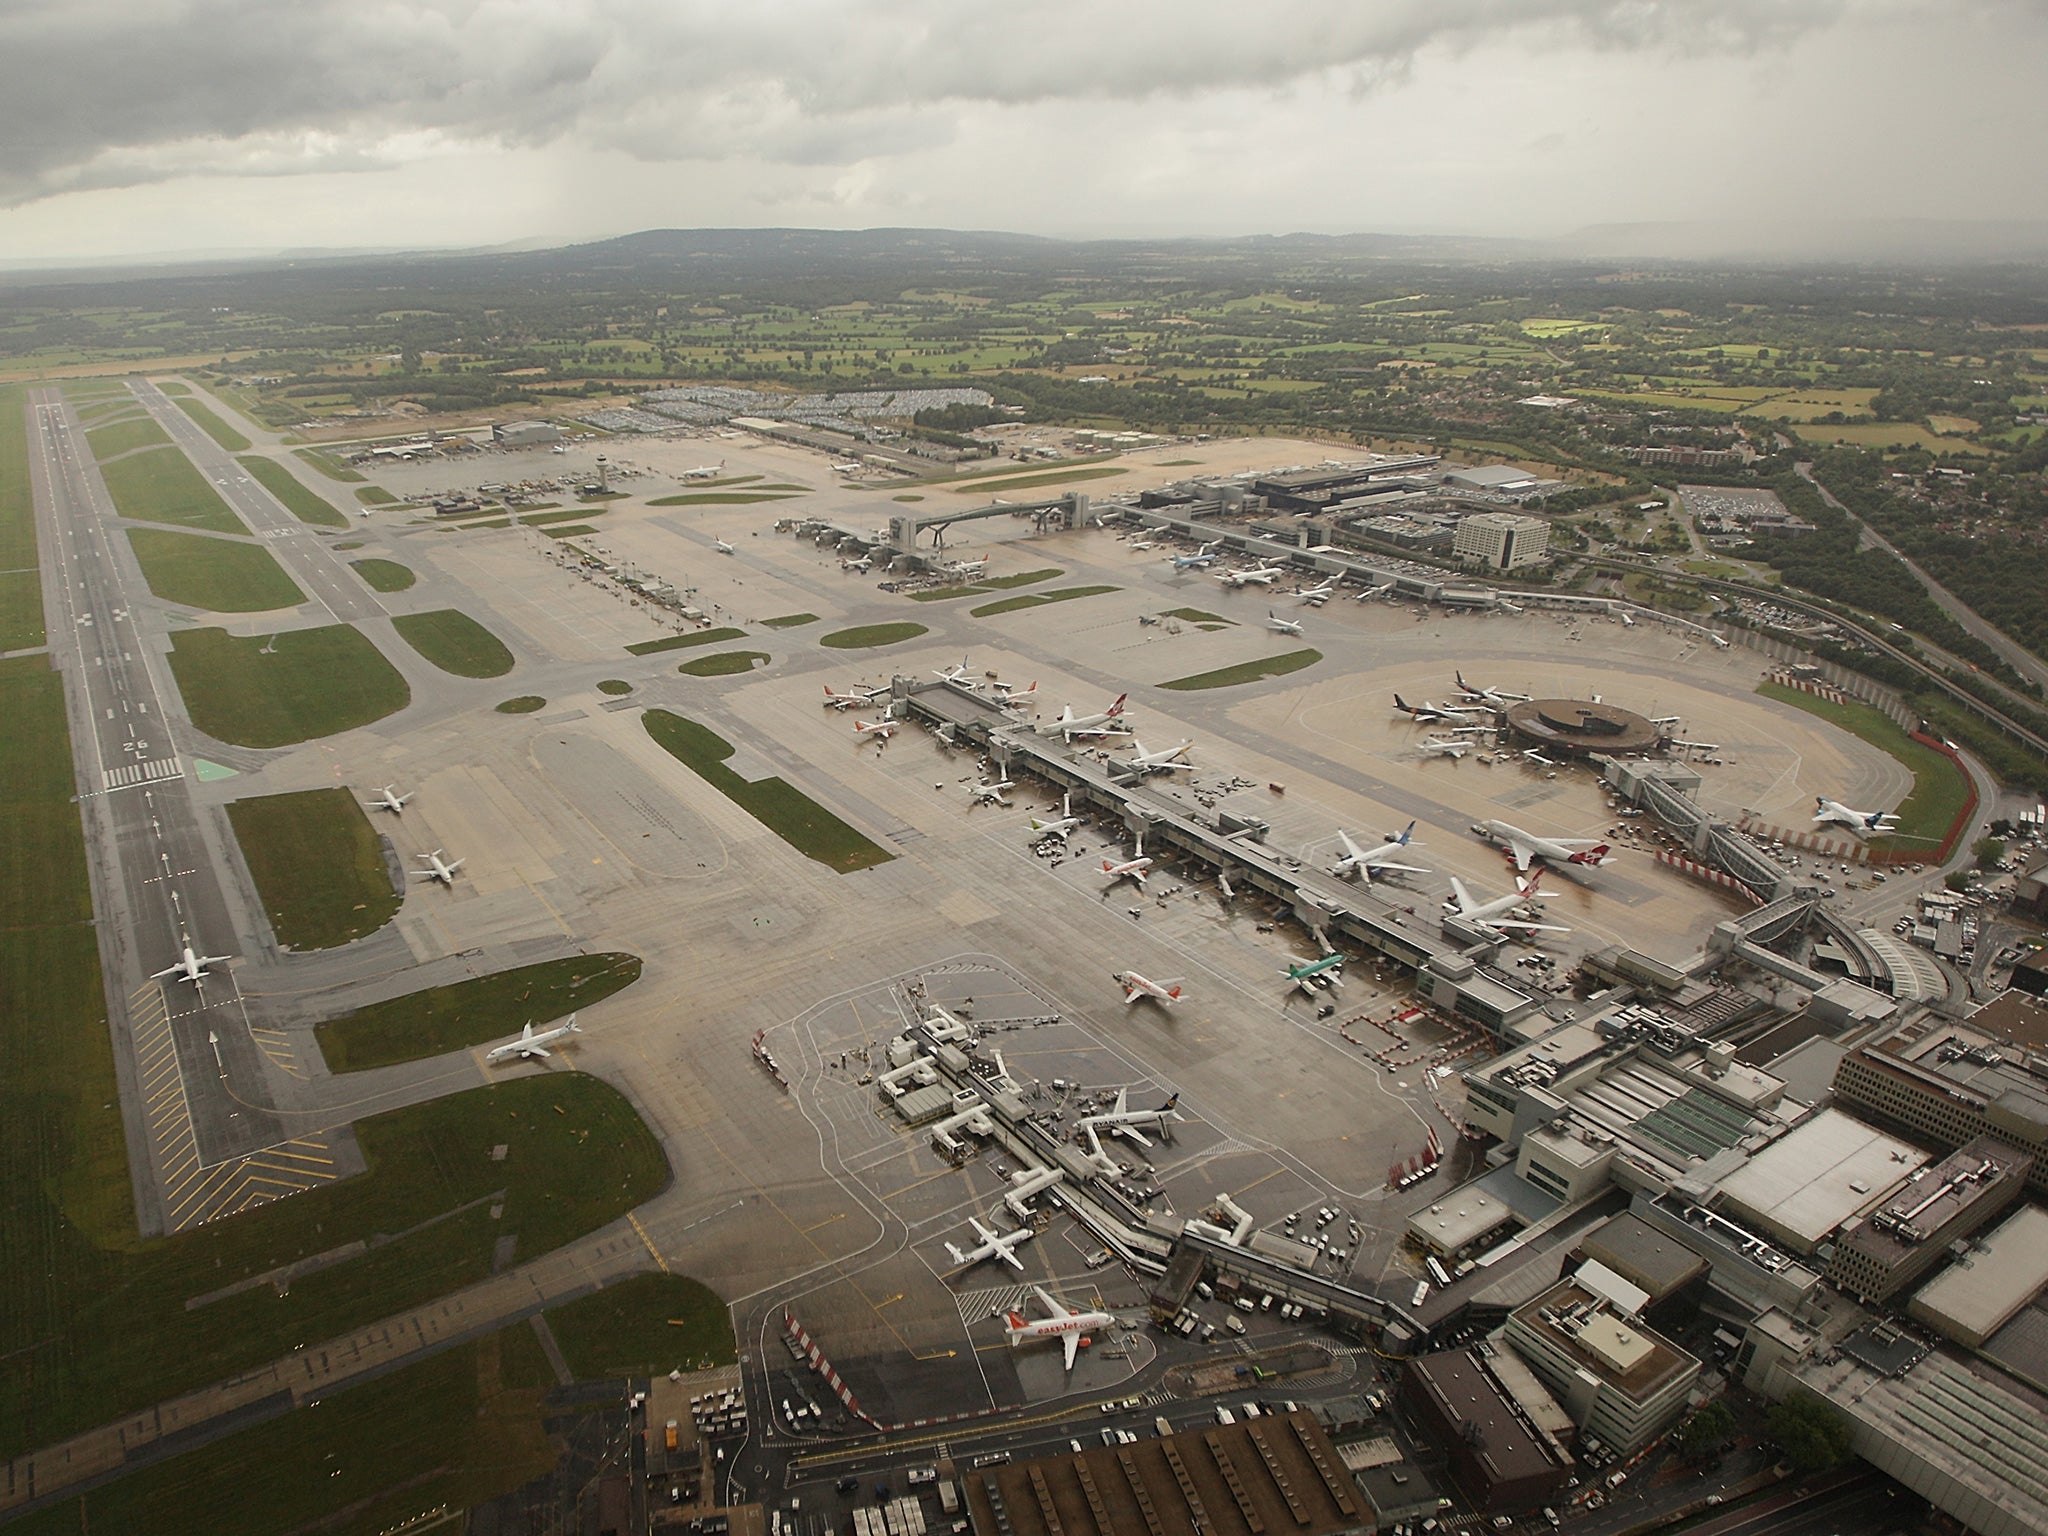 There has been decades of debate on airport expansion, including whether Gatwick should have an extra runway